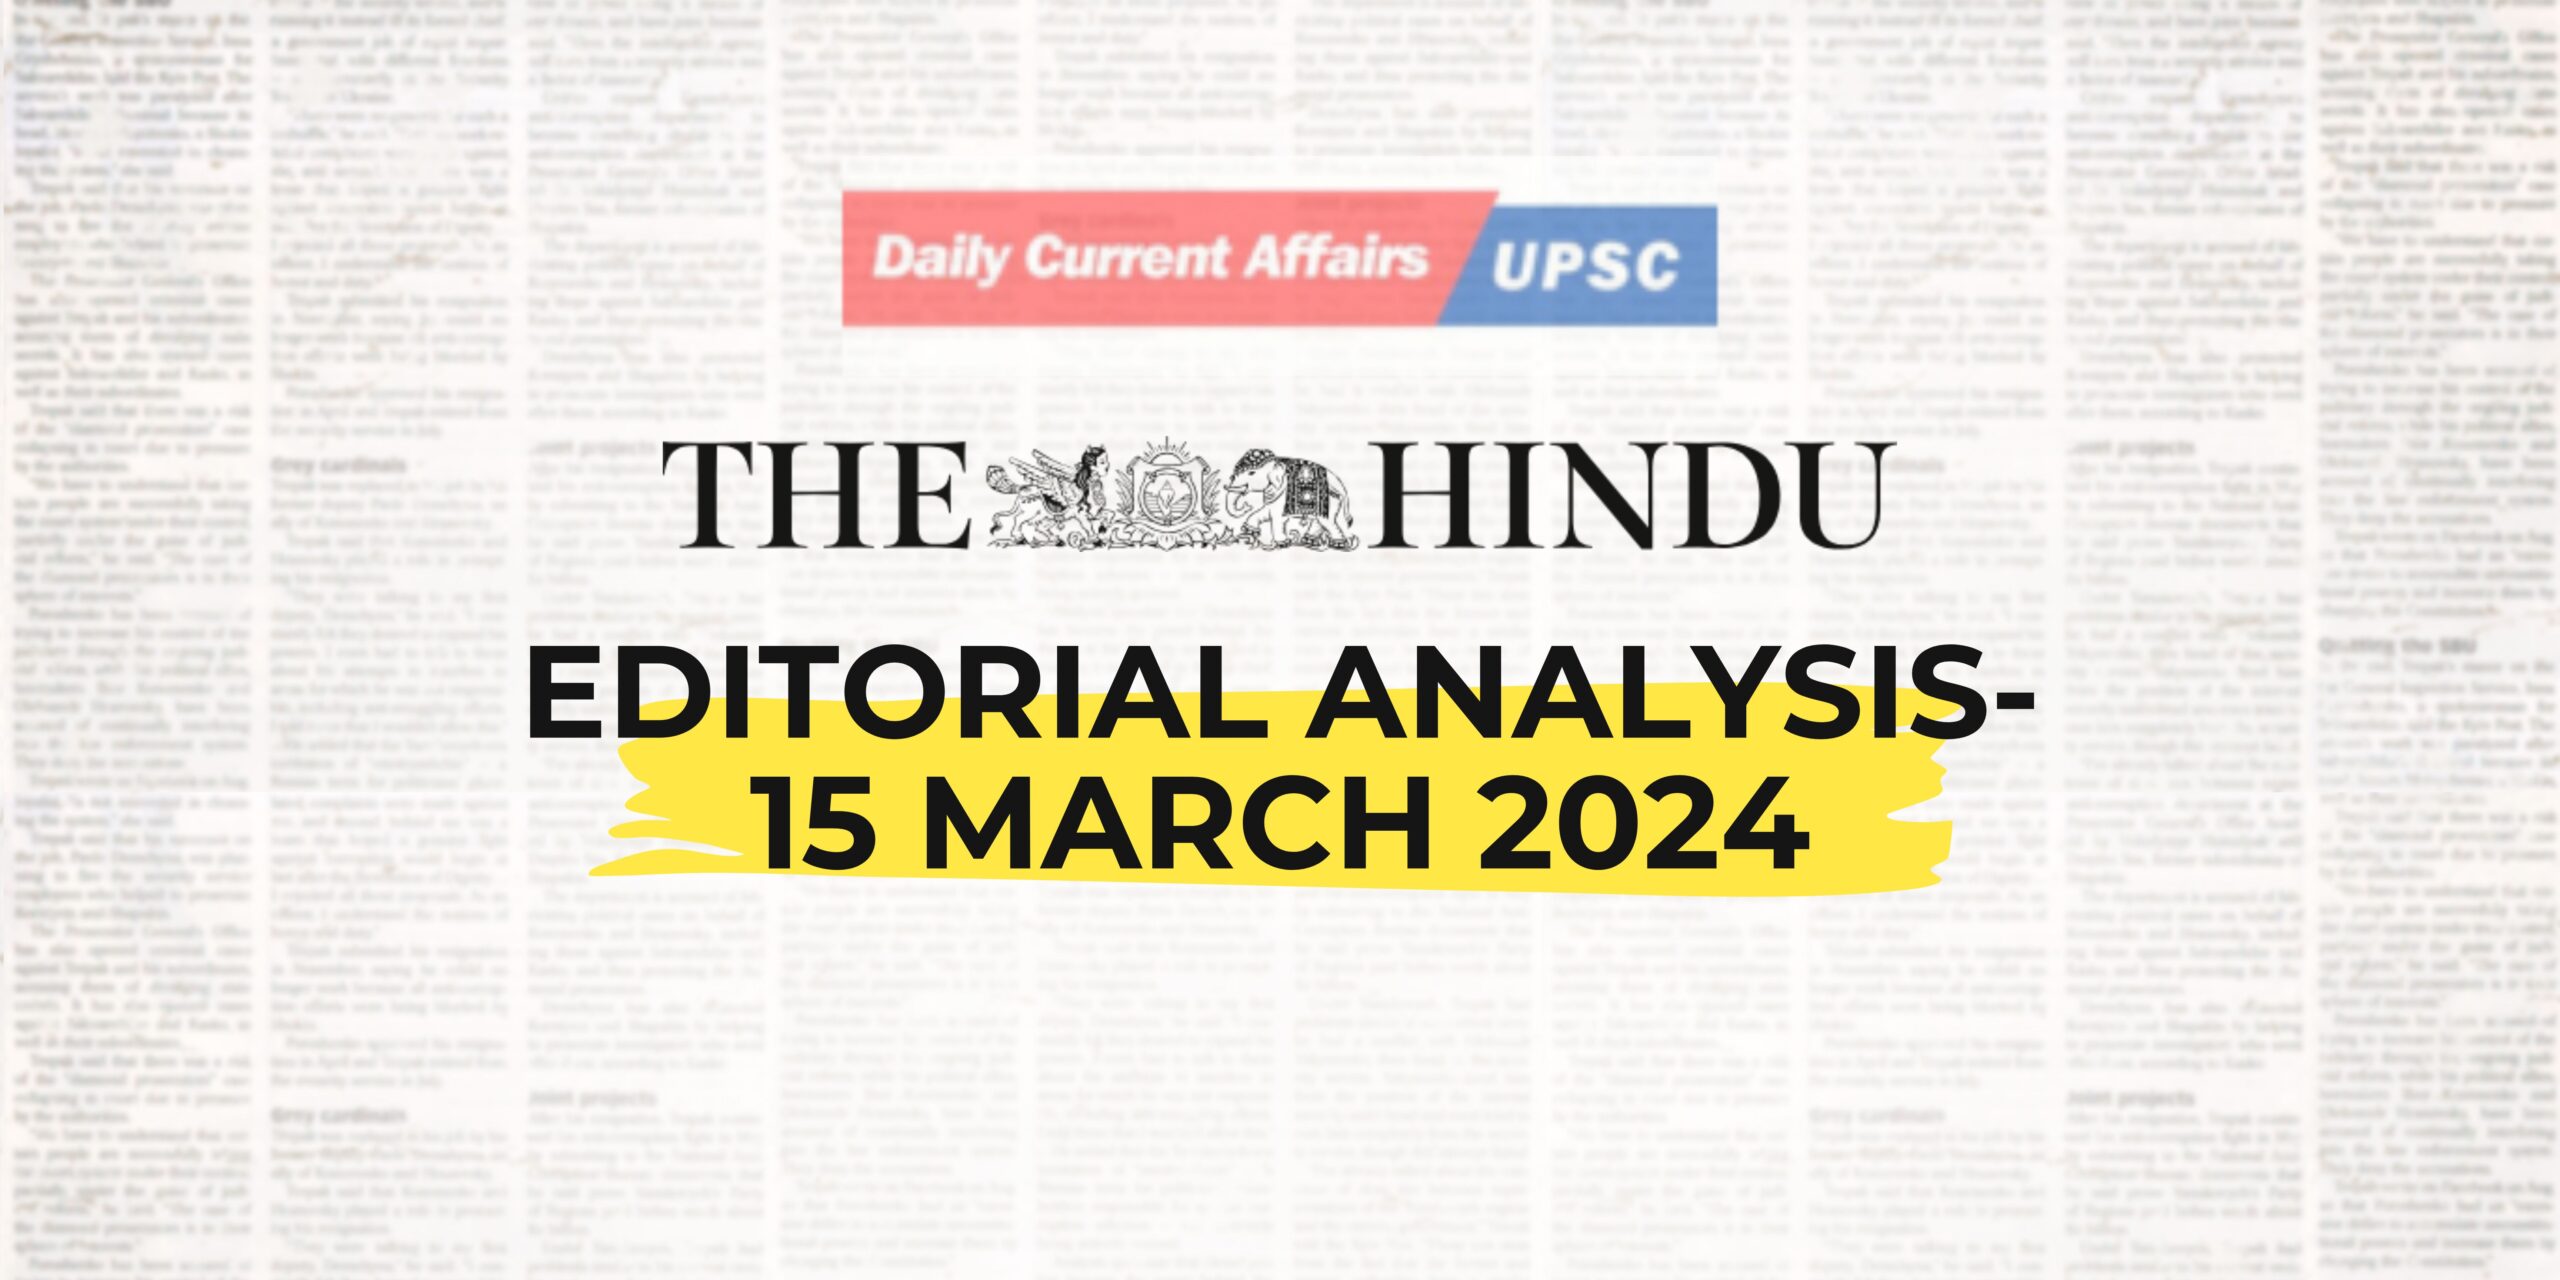 The Hindu Editorial Analysis- 15 March 2024